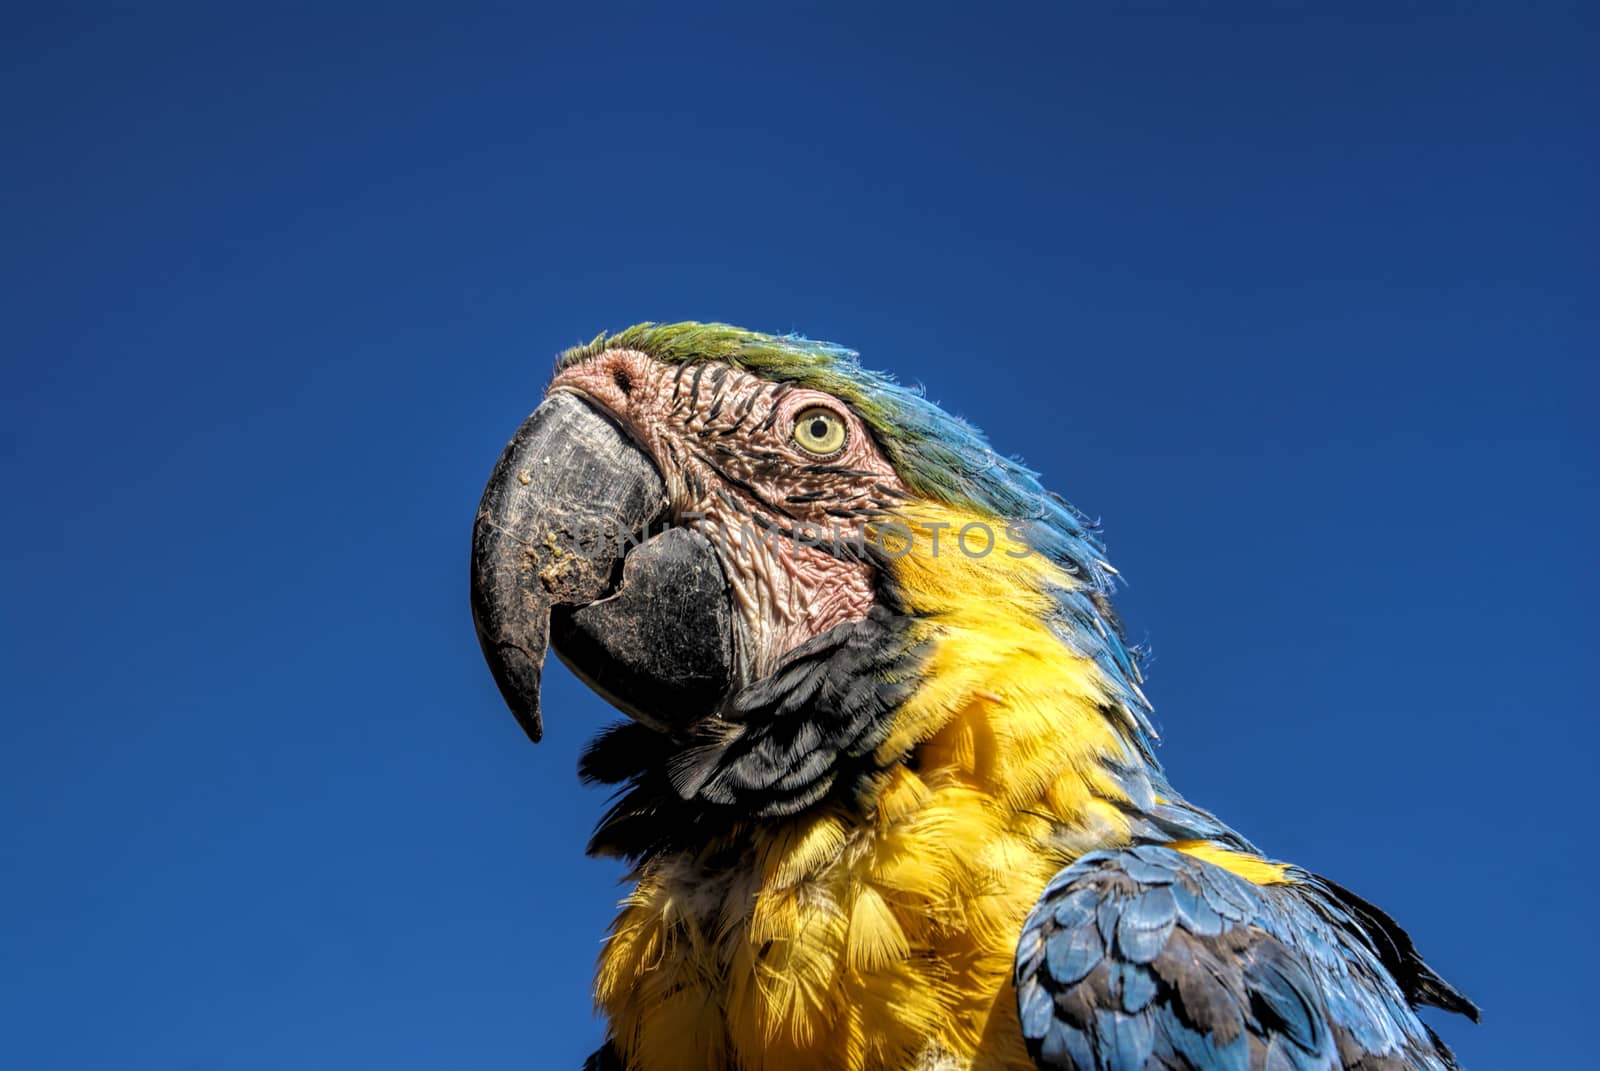 Beautiful Ara parrot with colorful blue and yellow feathers